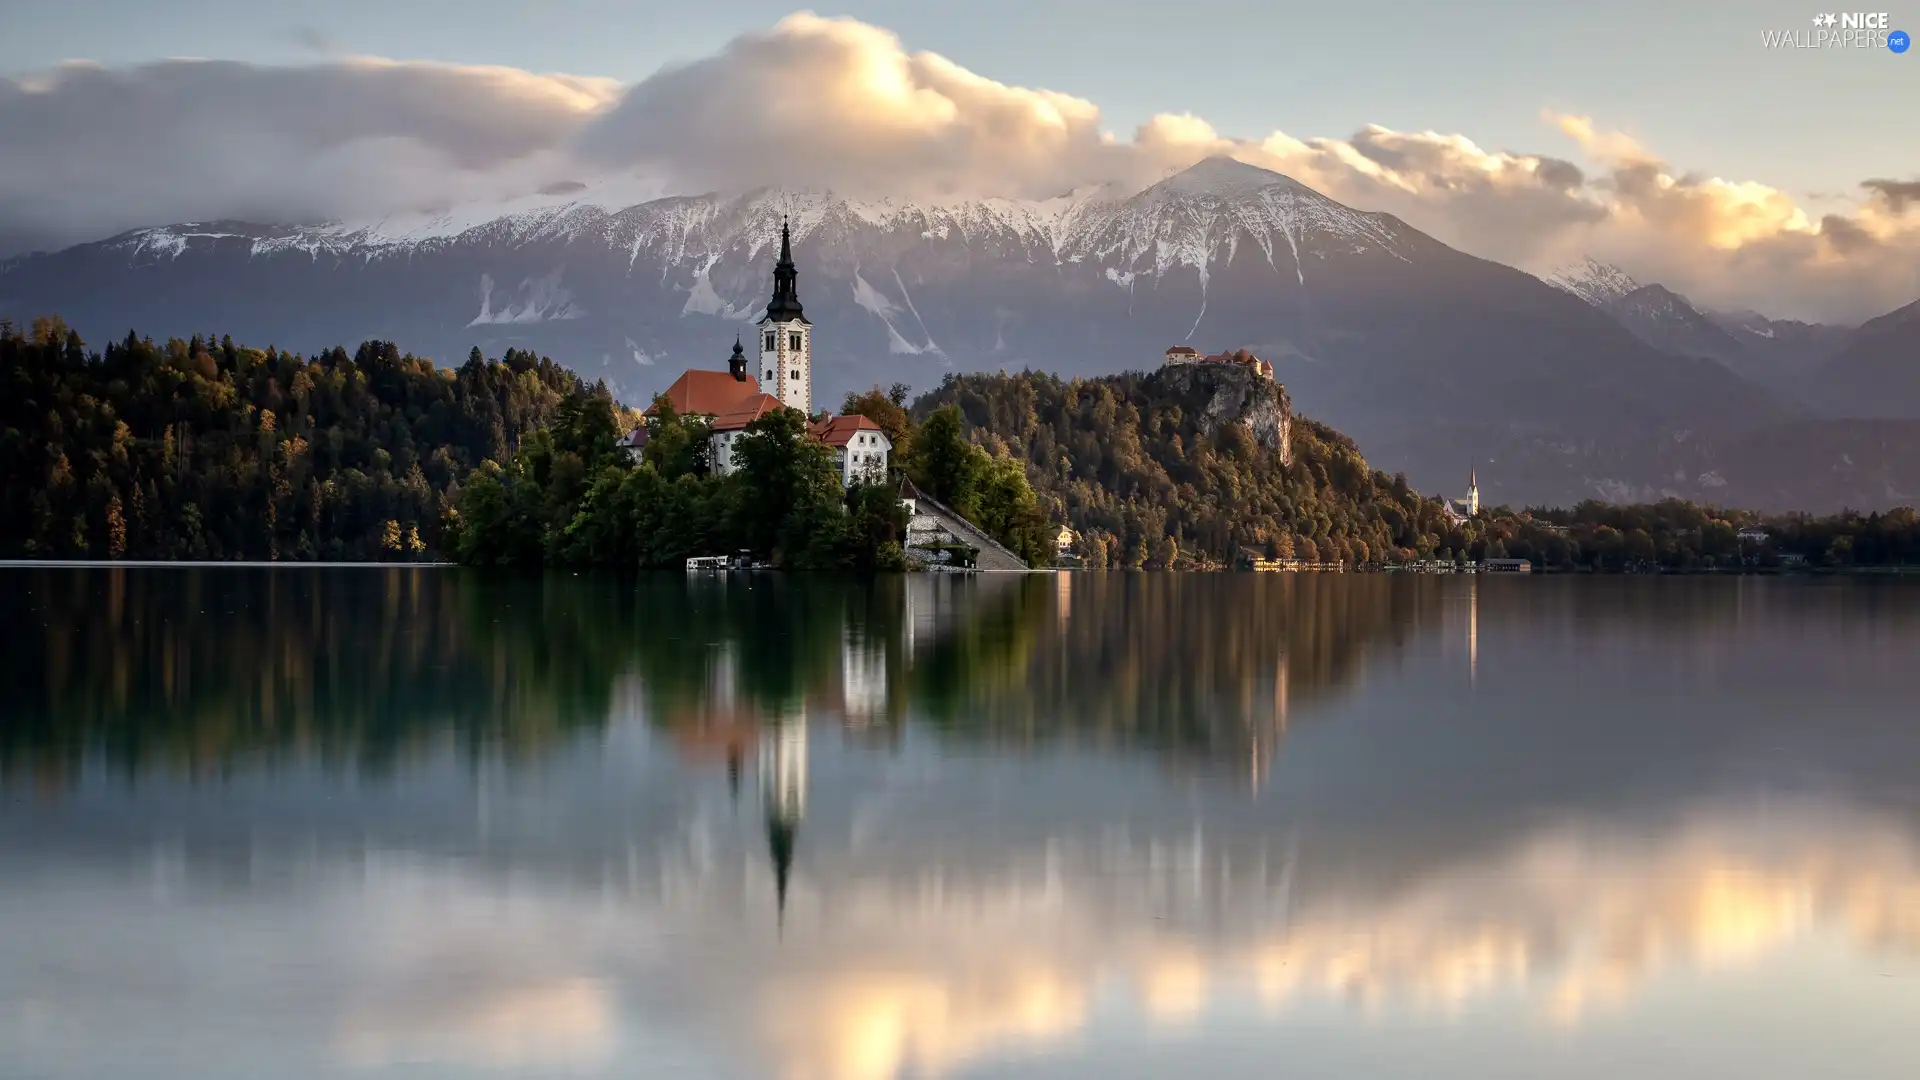 Mountains, Church, reflection, Island, clouds, Lake Bled, Slovenia, Bled Island